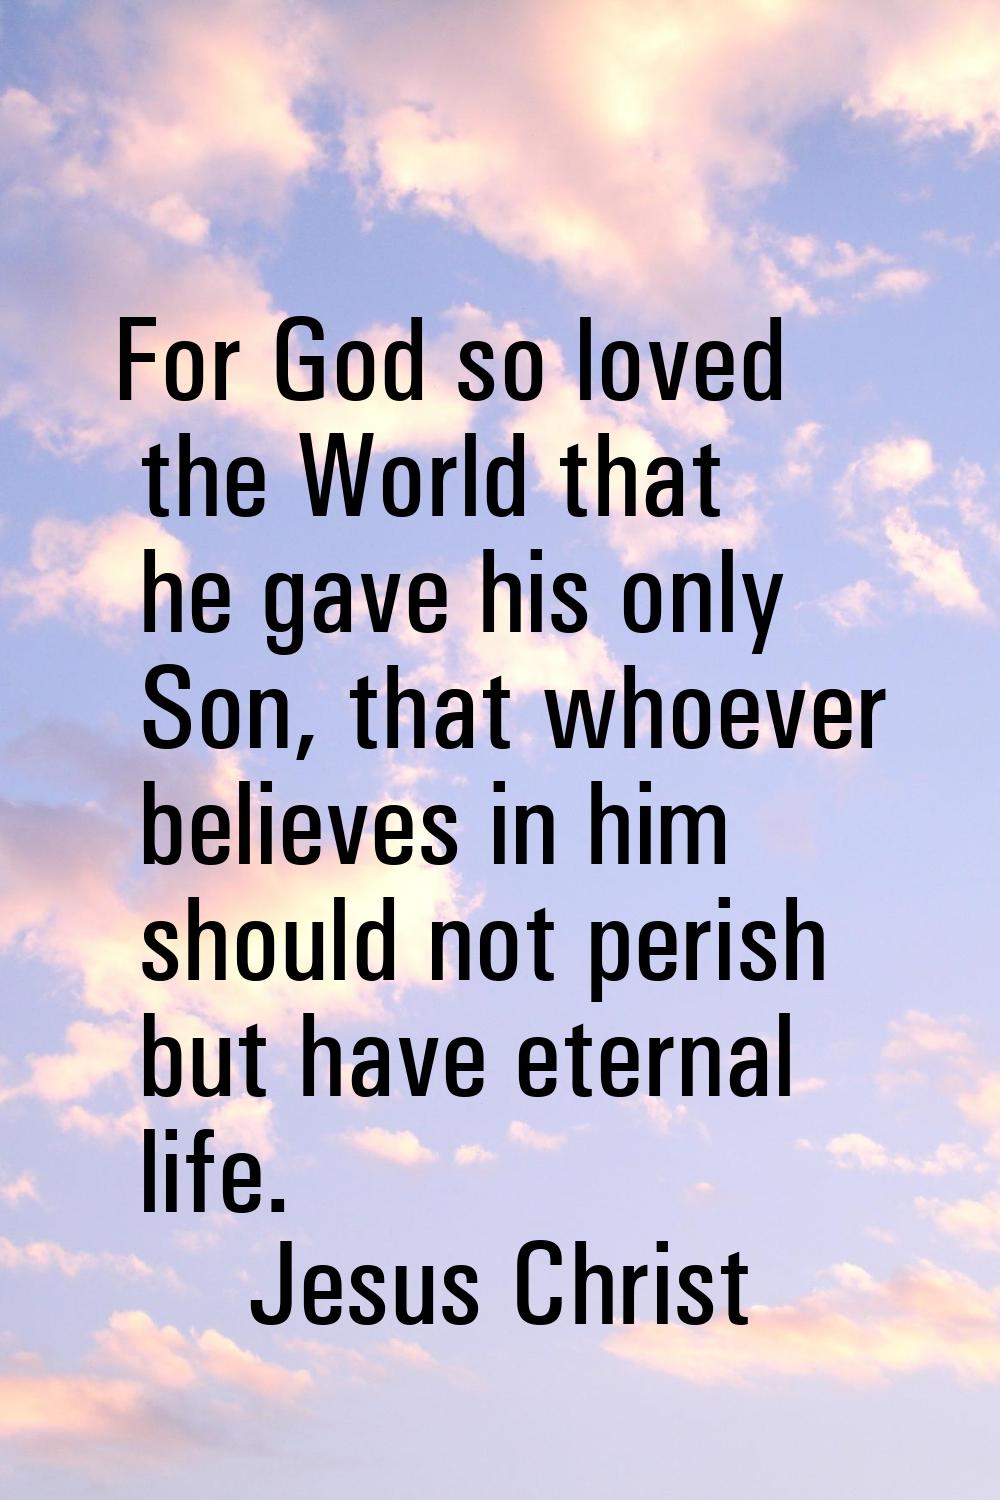 For God so loved the World that he gave his only Son, that whoever believes in him should not peris